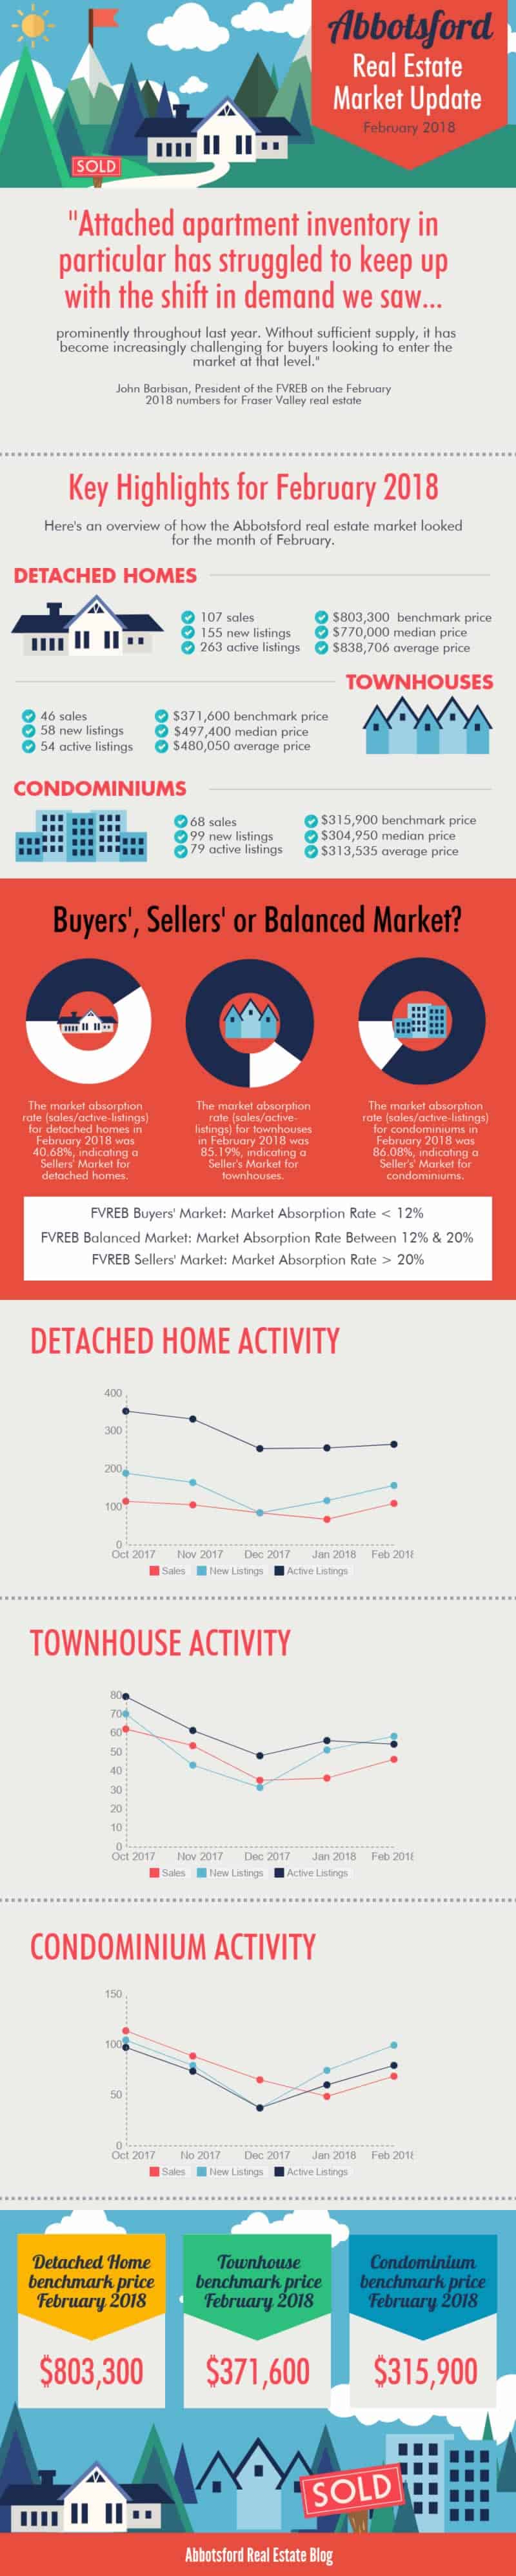 Abbotsford Detached Home Market Update February 2018 Infographic